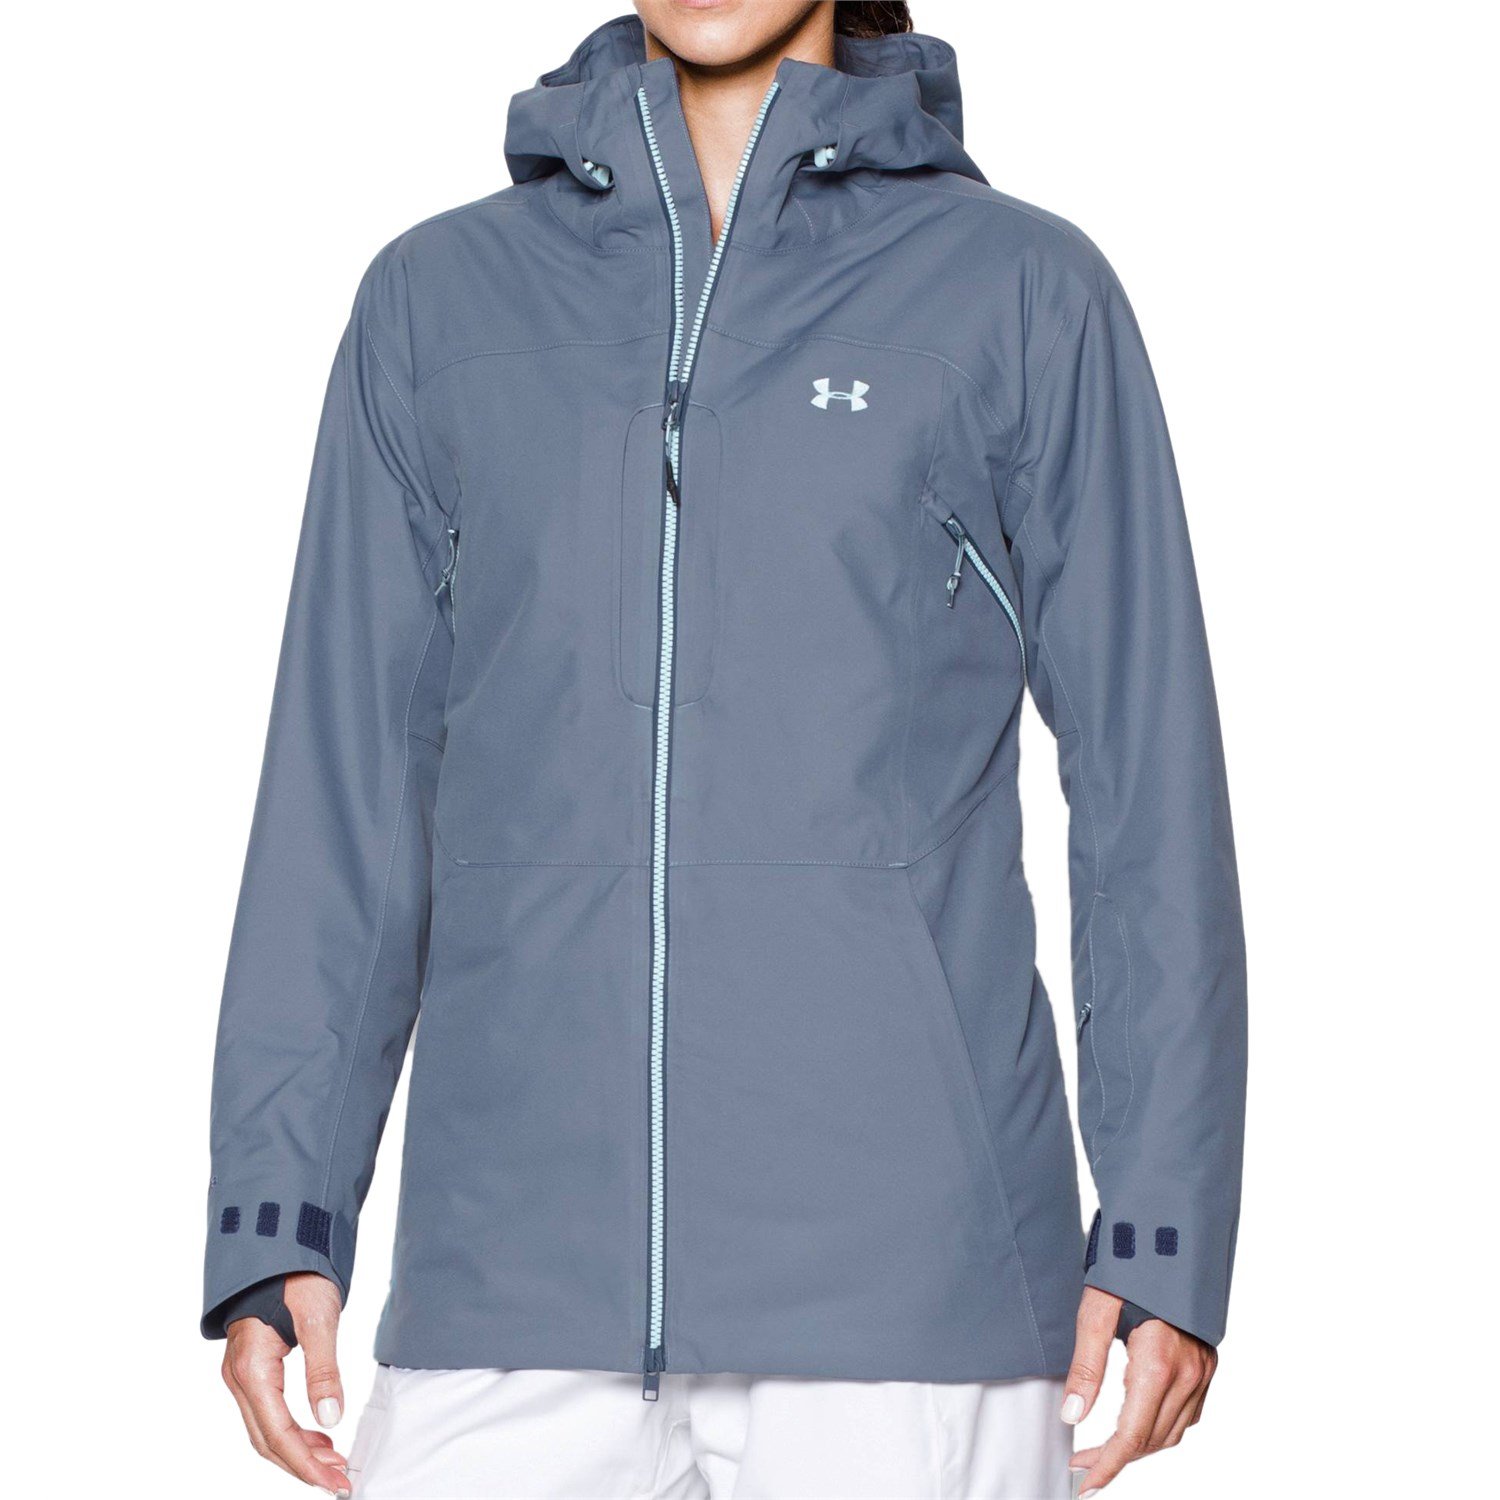 Cheap under armour jackets price Buy 